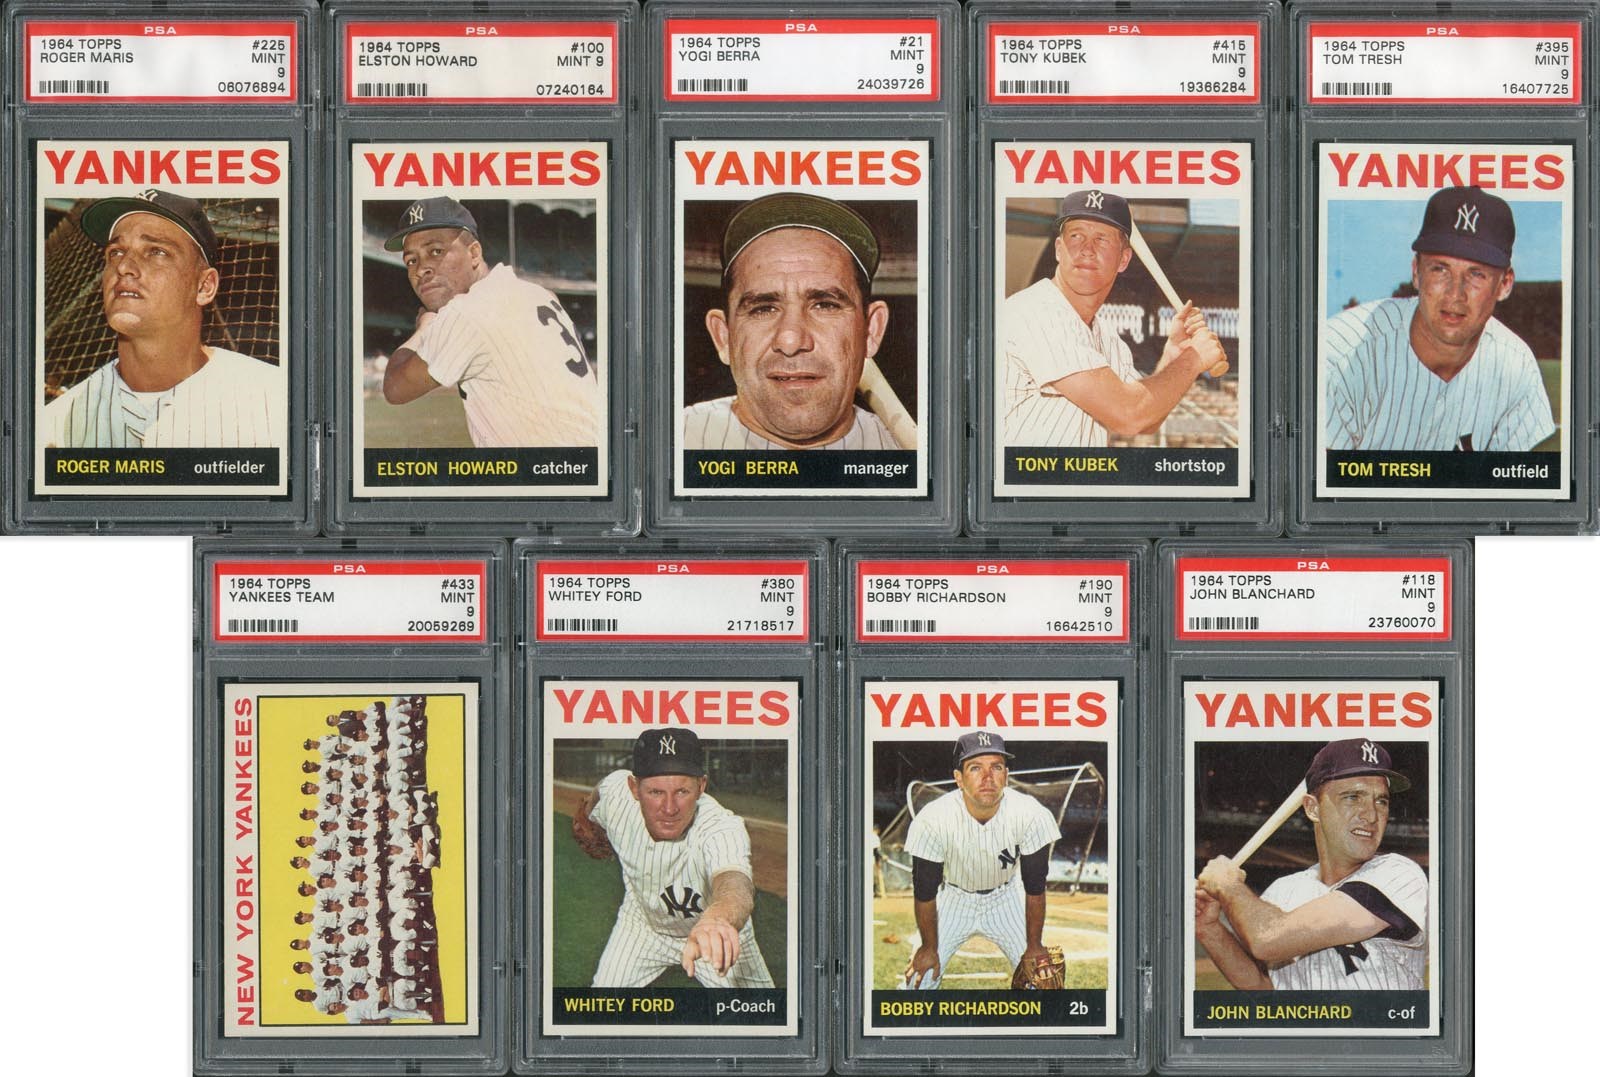 Baseball and Trading Cards - 1964 Topps Yankees PSA MINT 9 Collection (21)